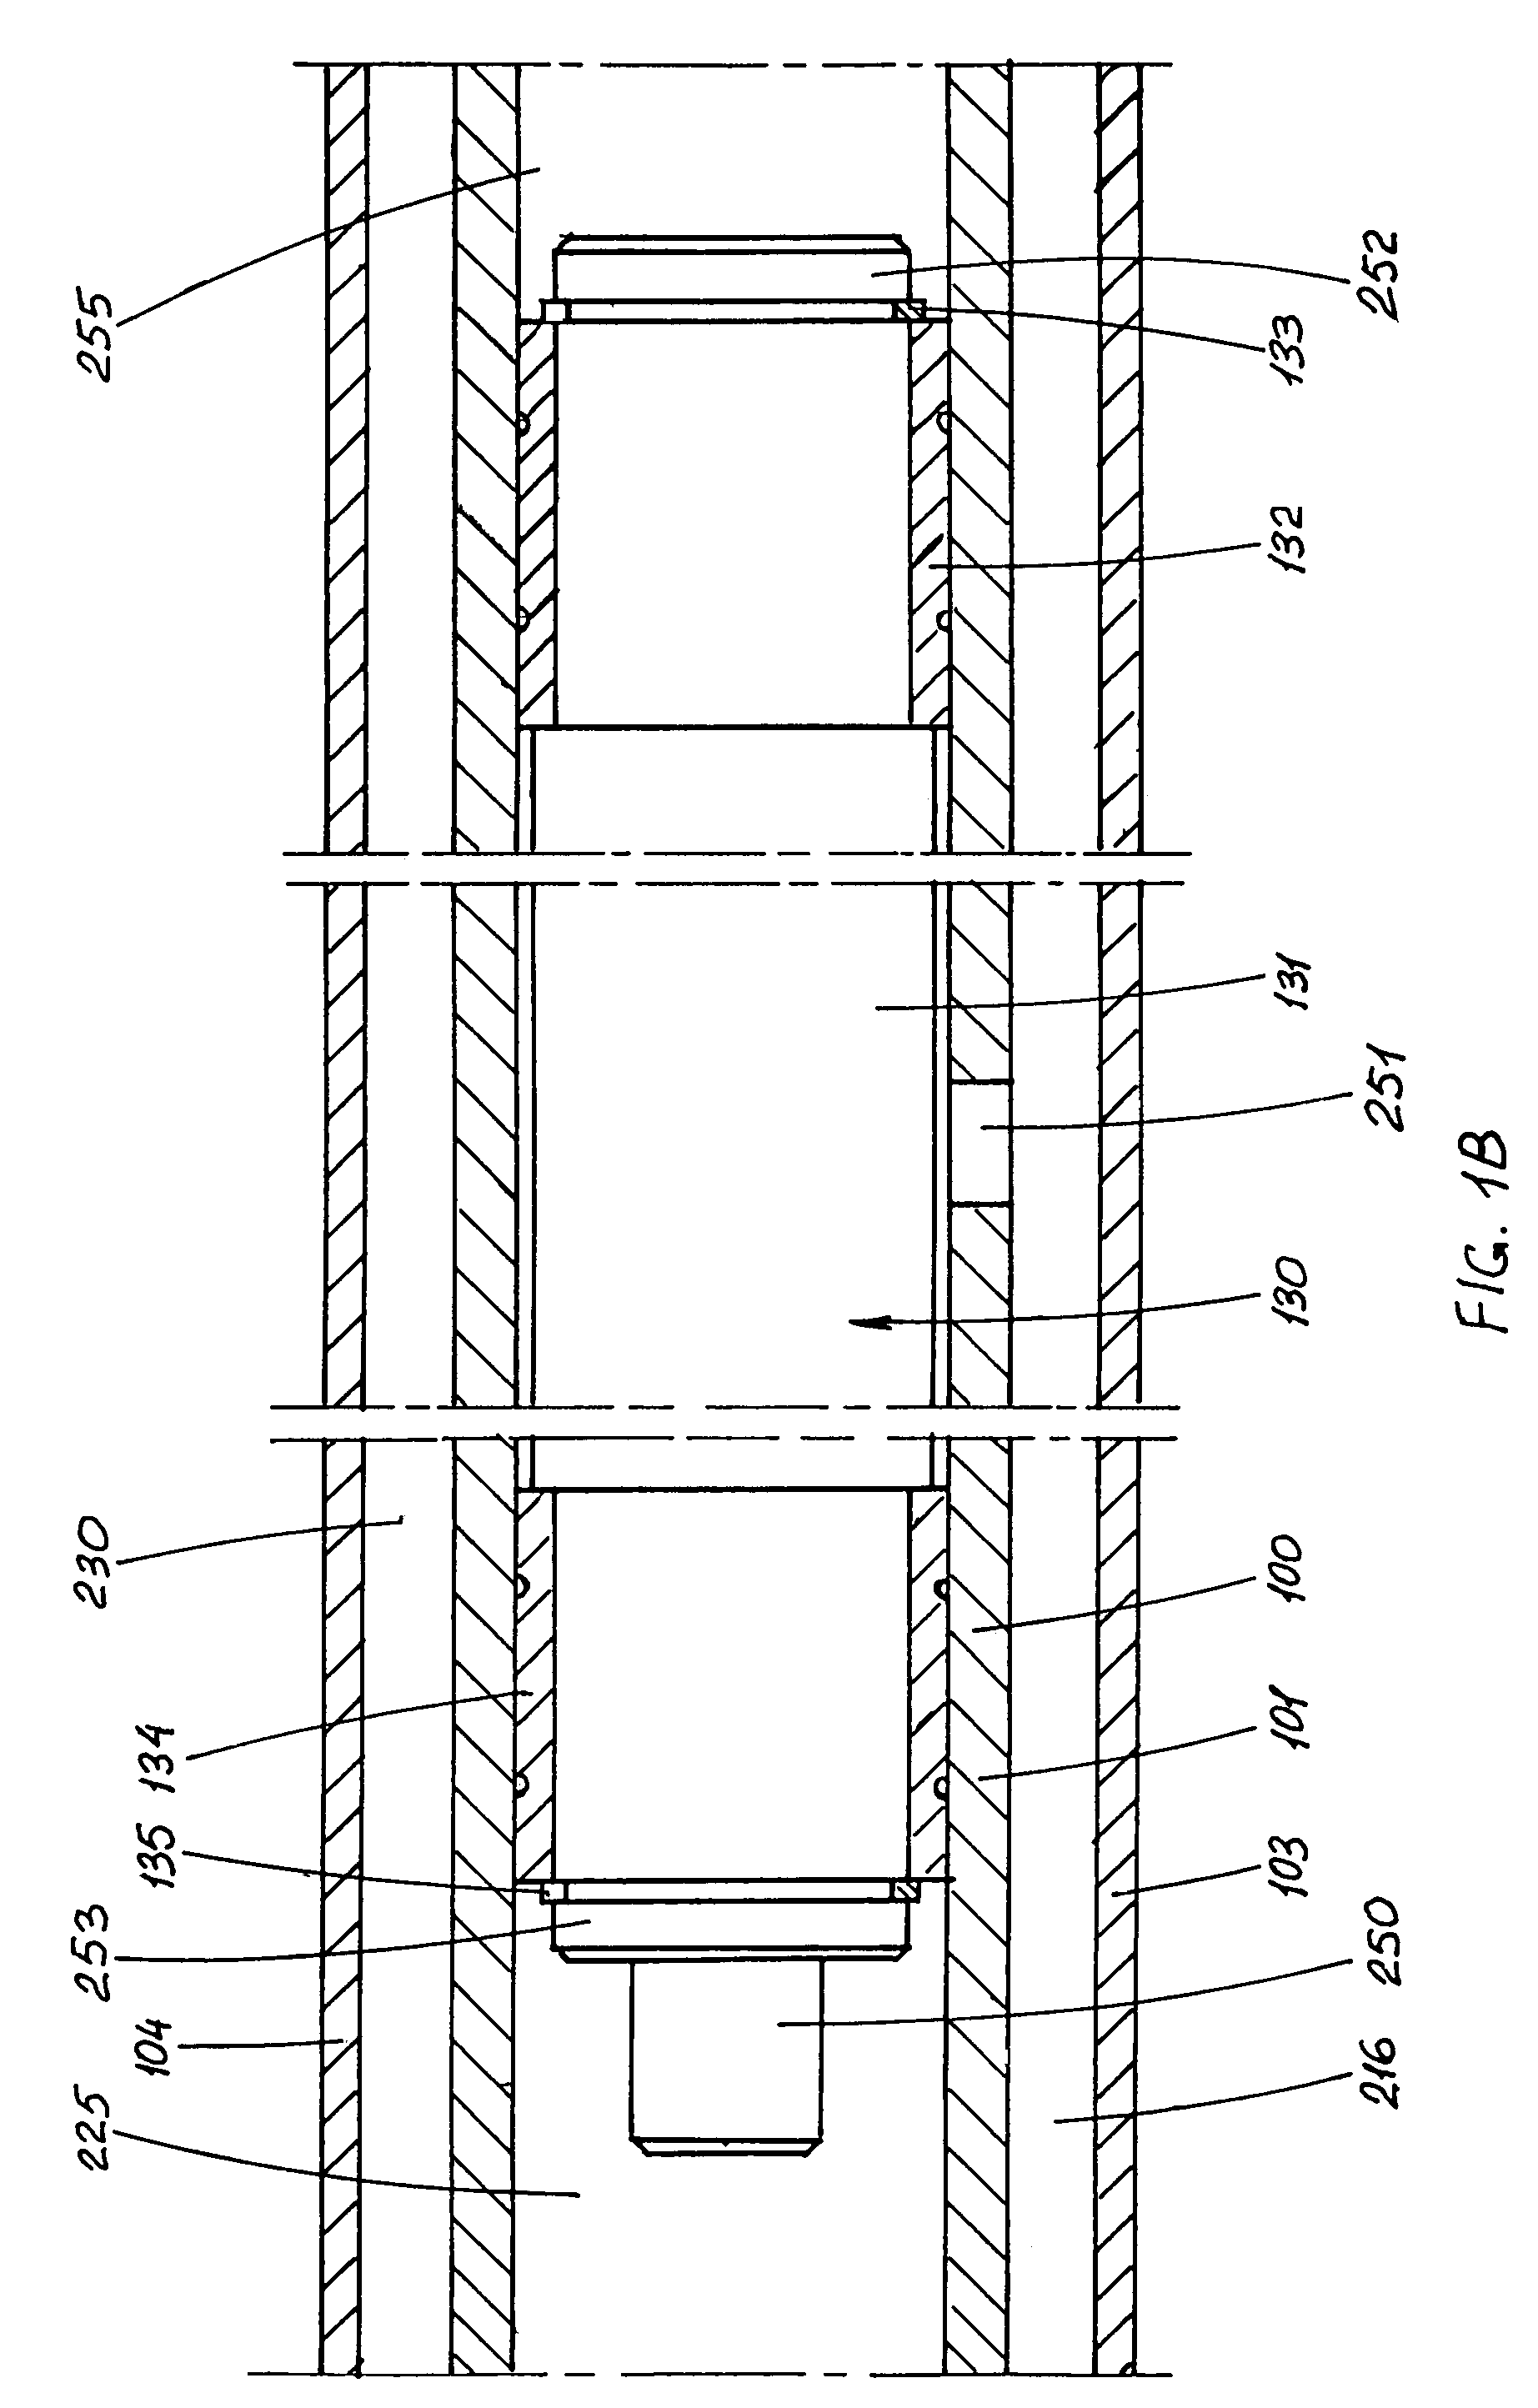 Reversible penetrating machine with a differential air distributing mechanism